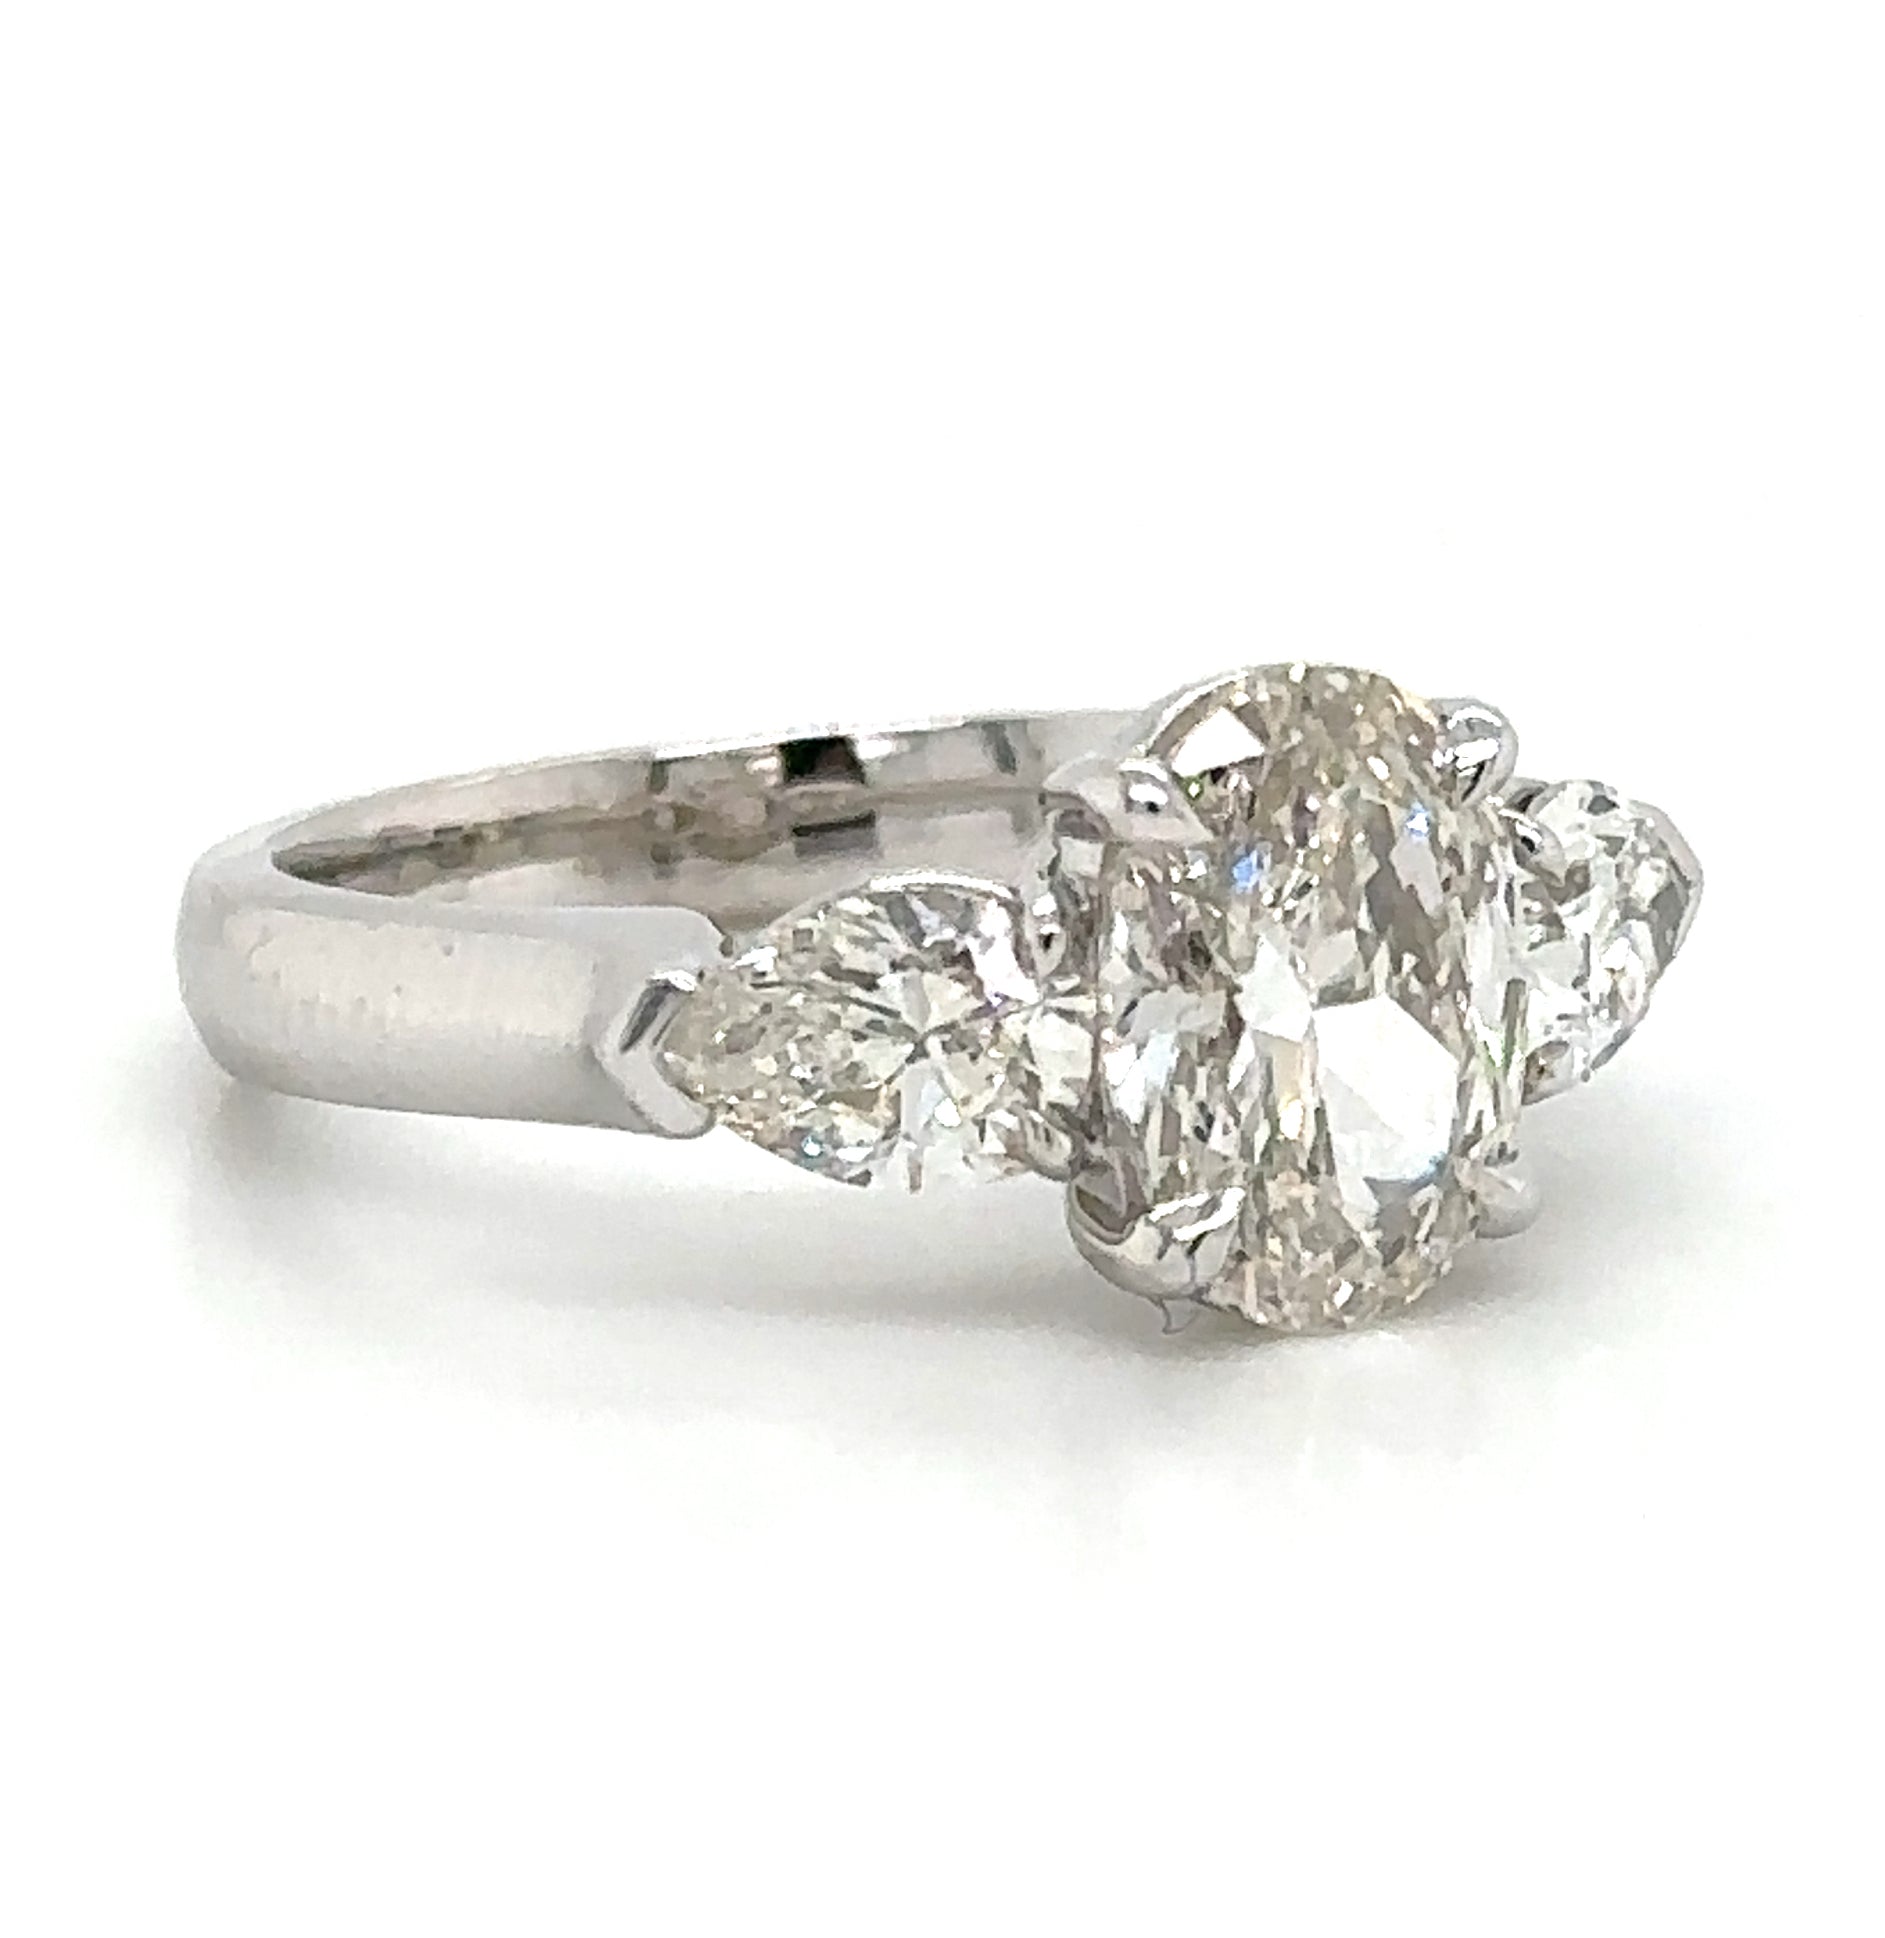 3.14carat Oval Brilliant Cut with side Pear-cuts Engagement Ring